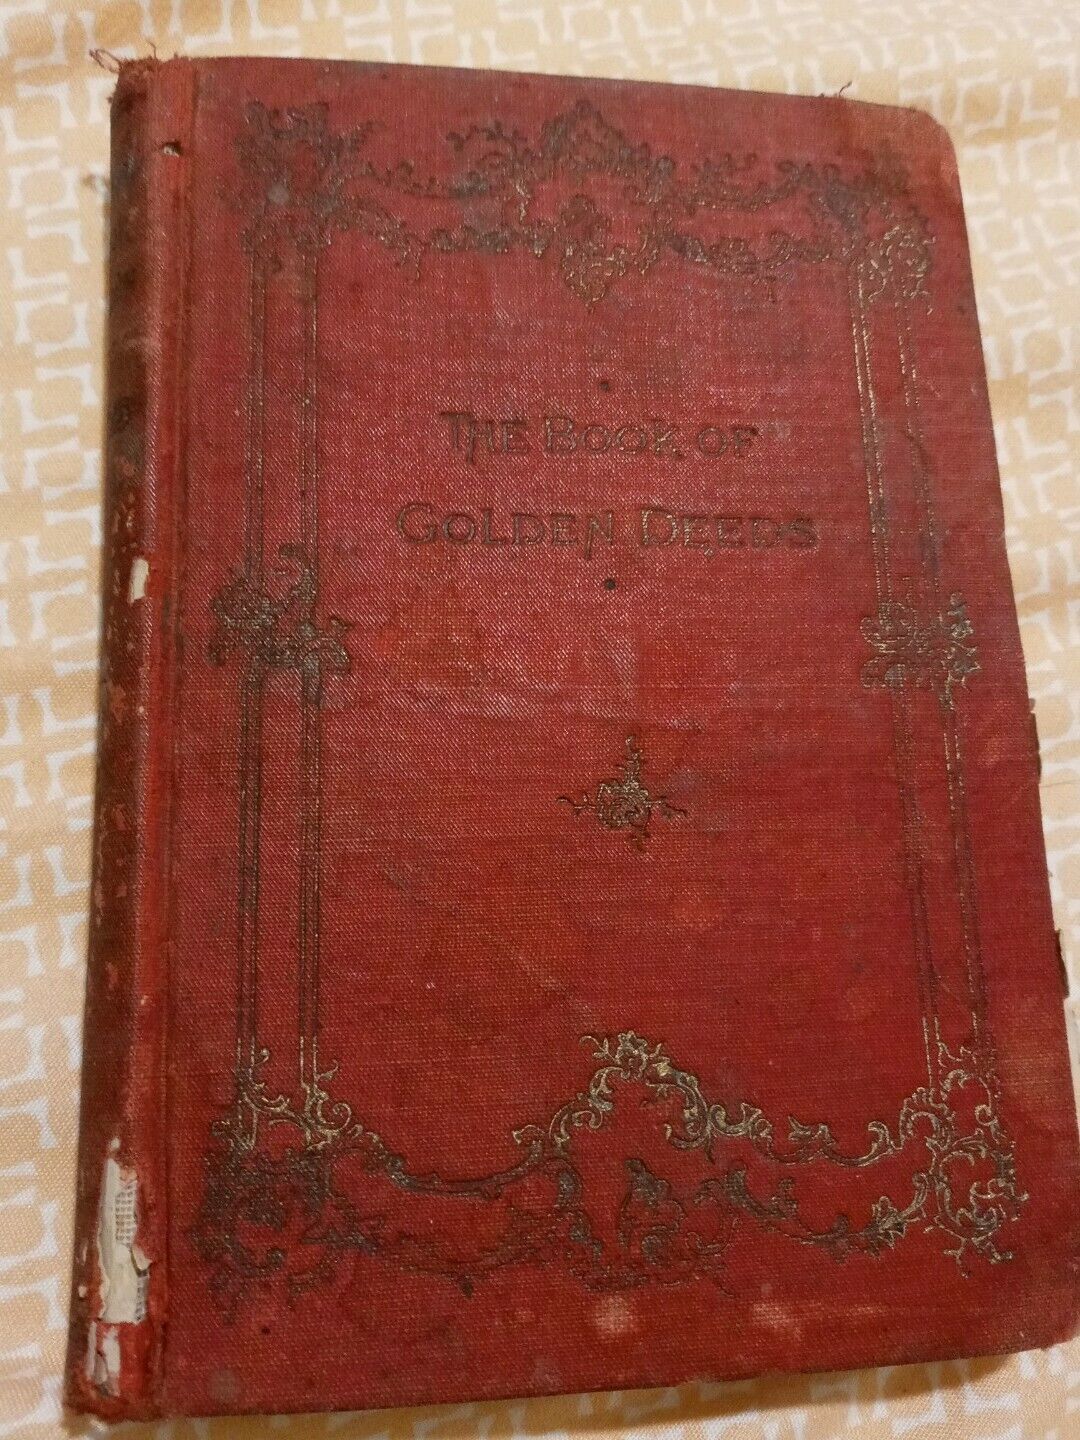 The Book Of Golden Deeds c1895 By Louis Klopsch The Christian Herald C. Young